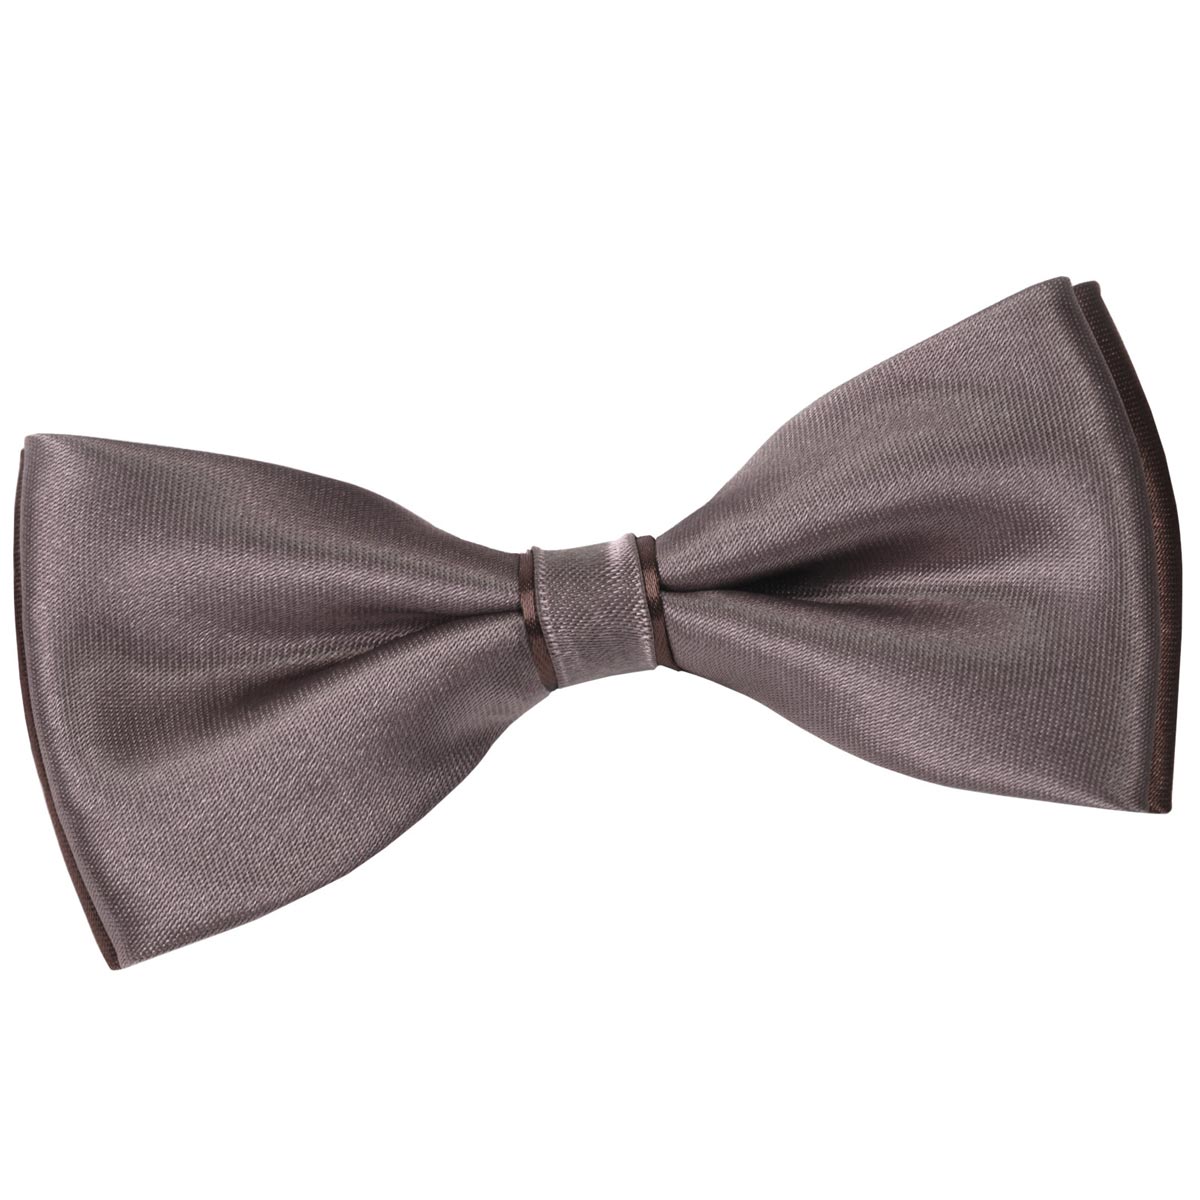 Noeud-papillon-bicolore-taupe-marron-dandytouch--ND-00123_A12-1--